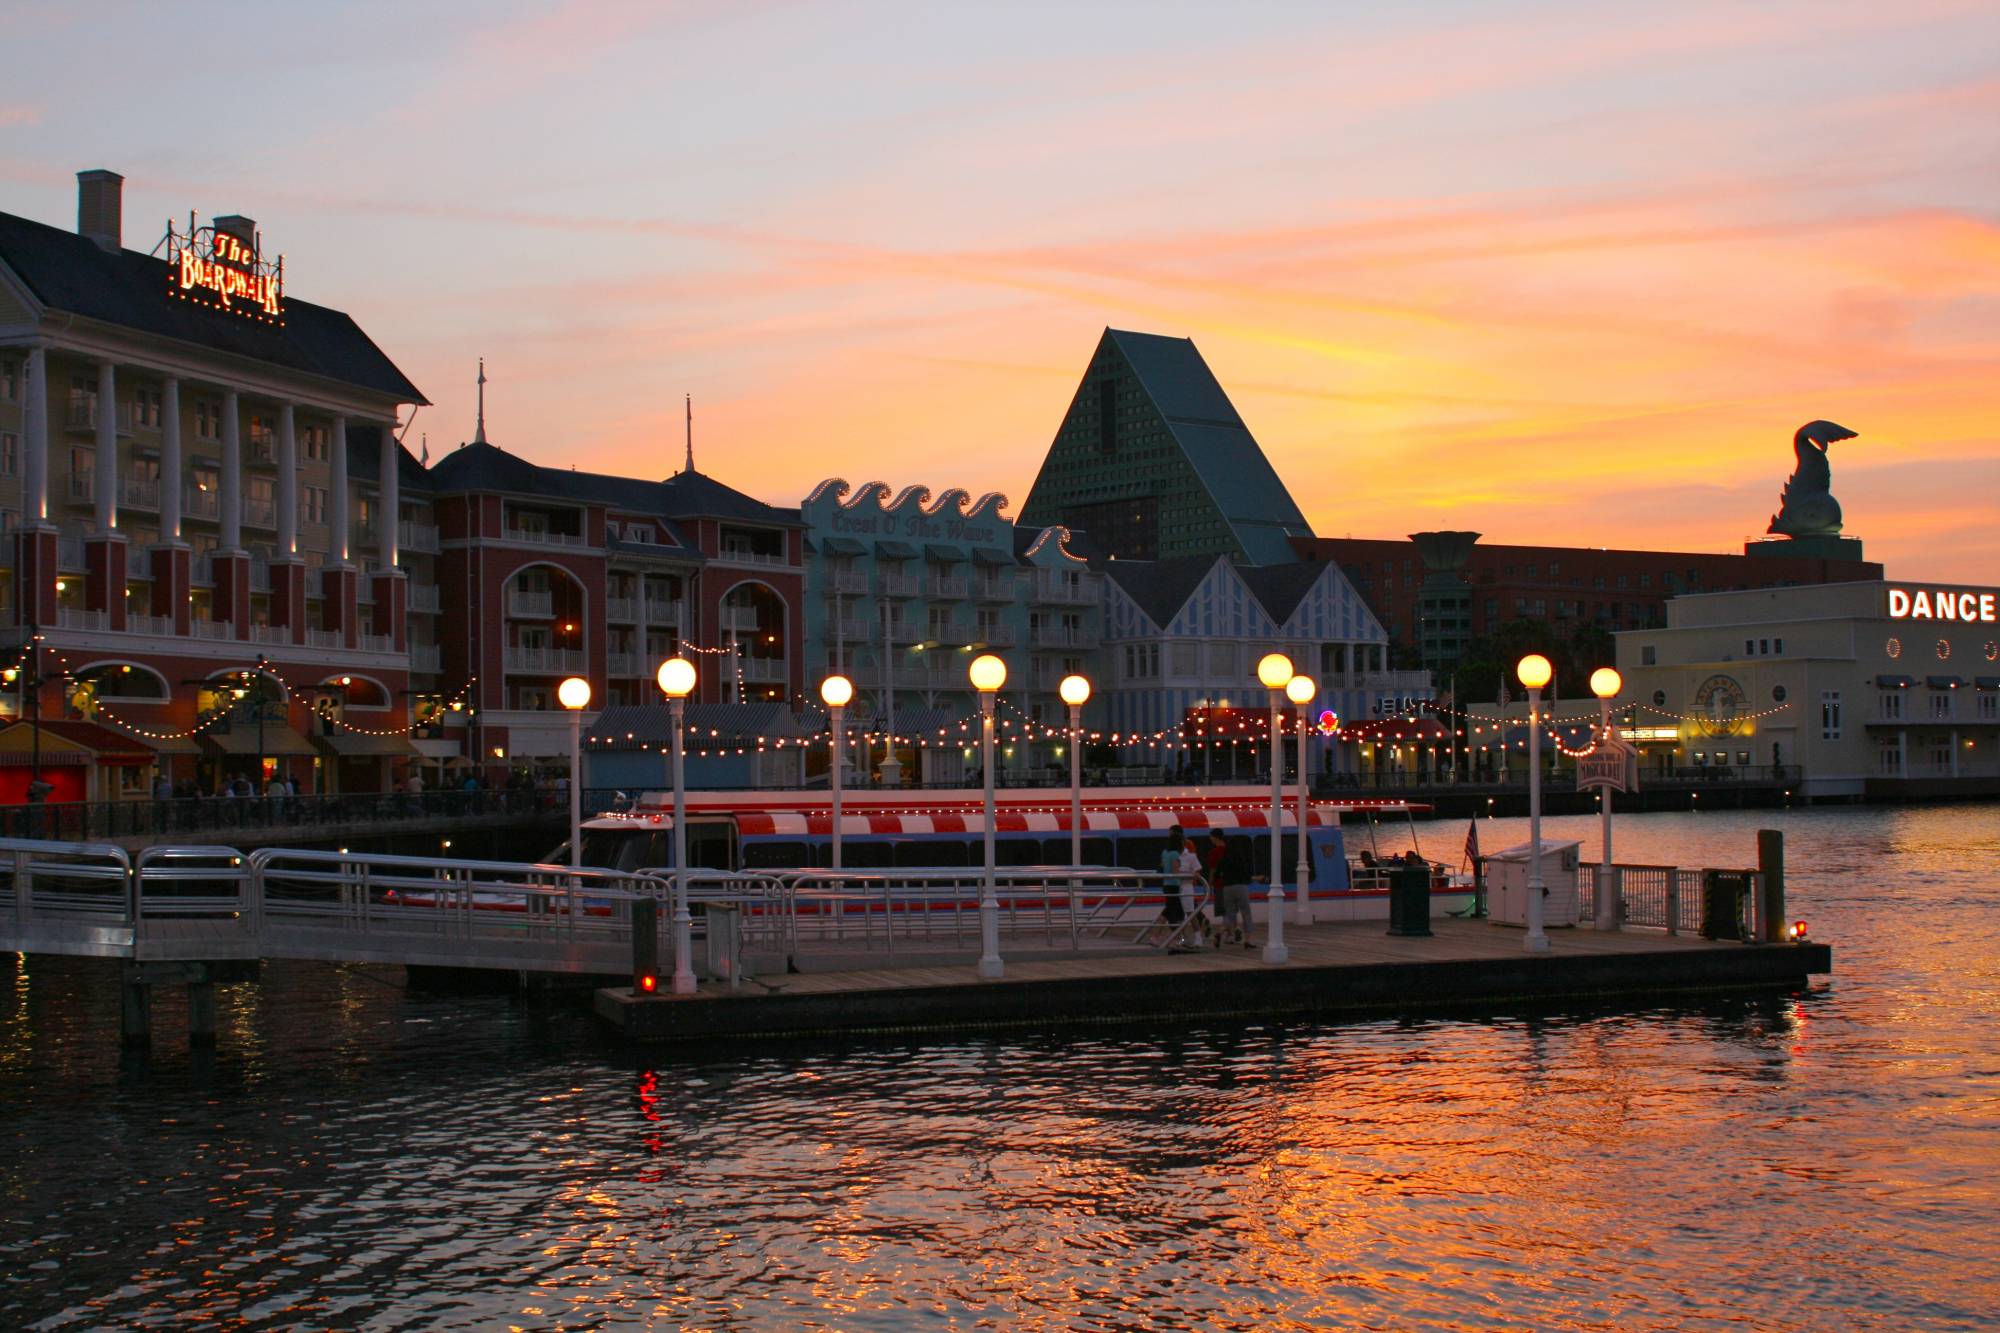 The Boardwalk at Sunset